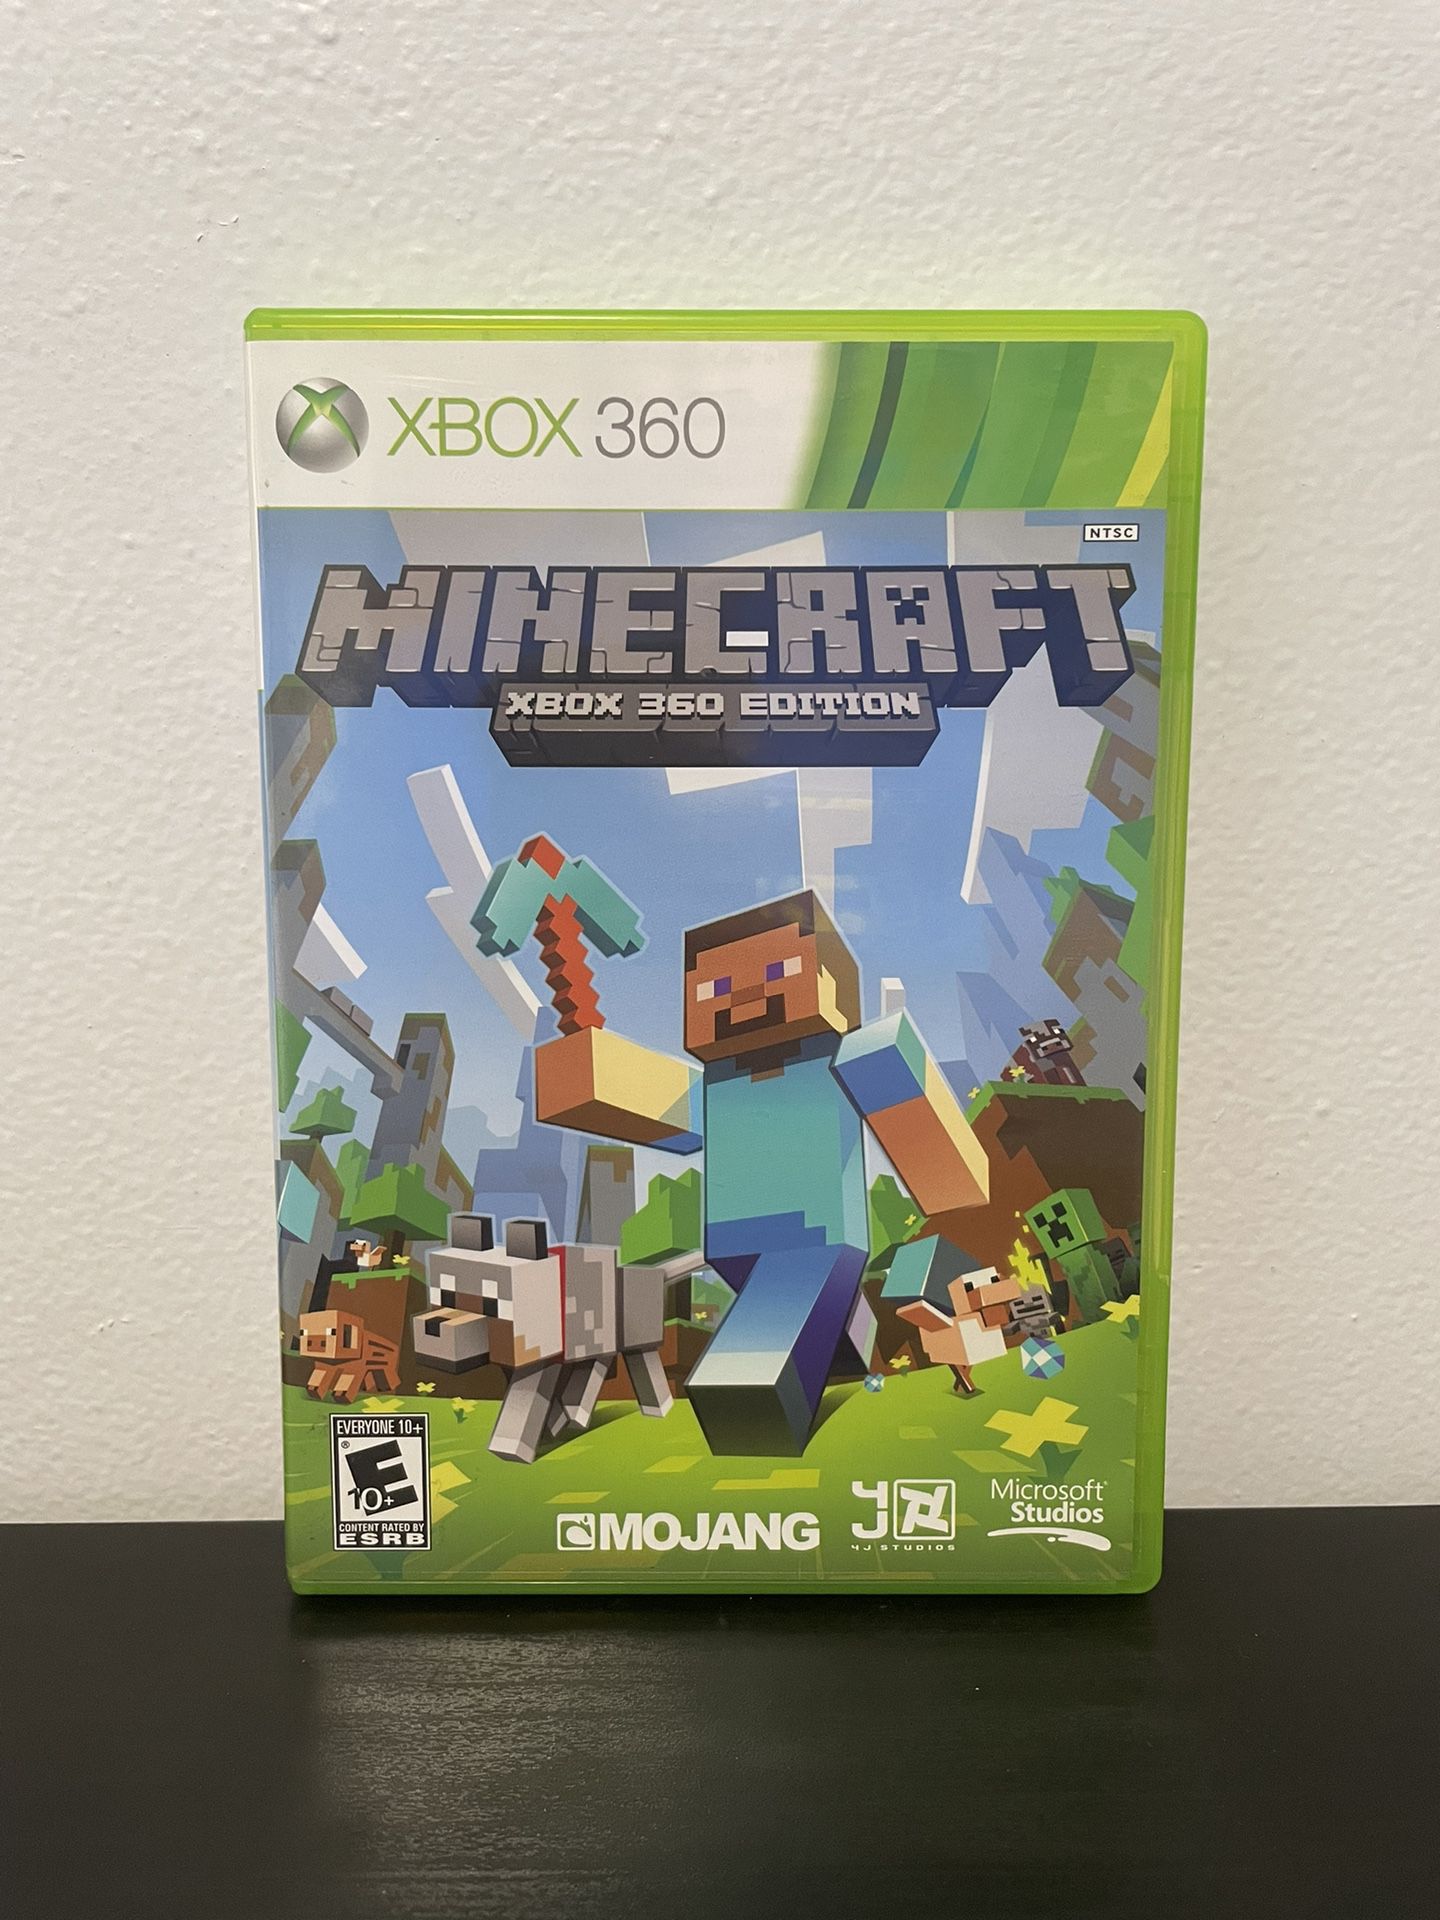 Minecraft Xbox 360 Edition Like New Condition Video Game Microsoft